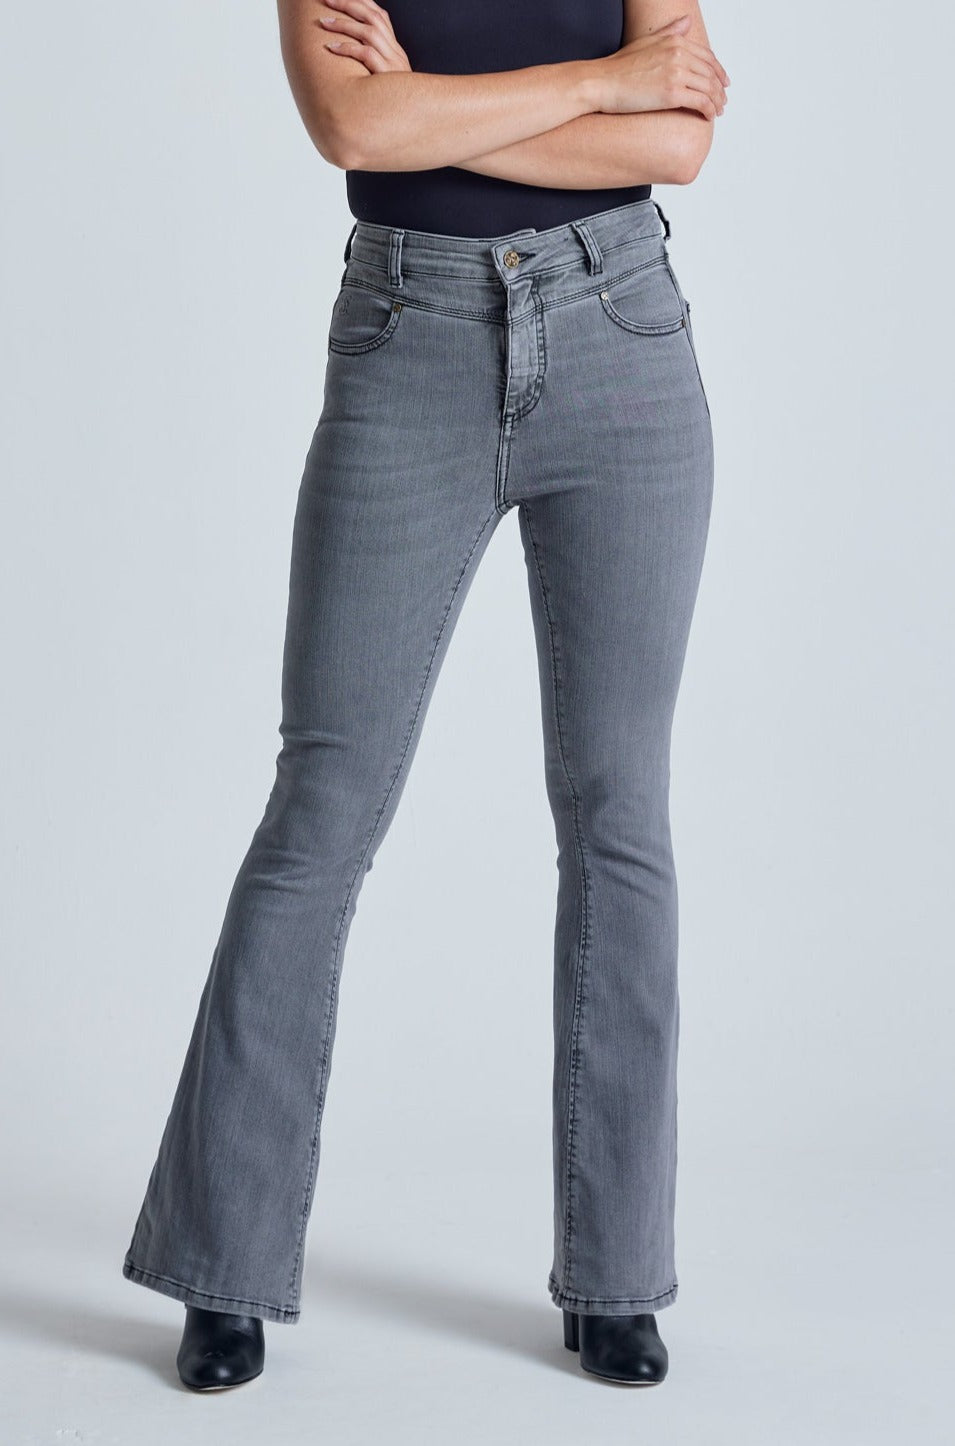 Silver Fox Mavis High Waisted Skinny flared Jeans - GOTS Certified Organic Cotton and Recycled Polyester